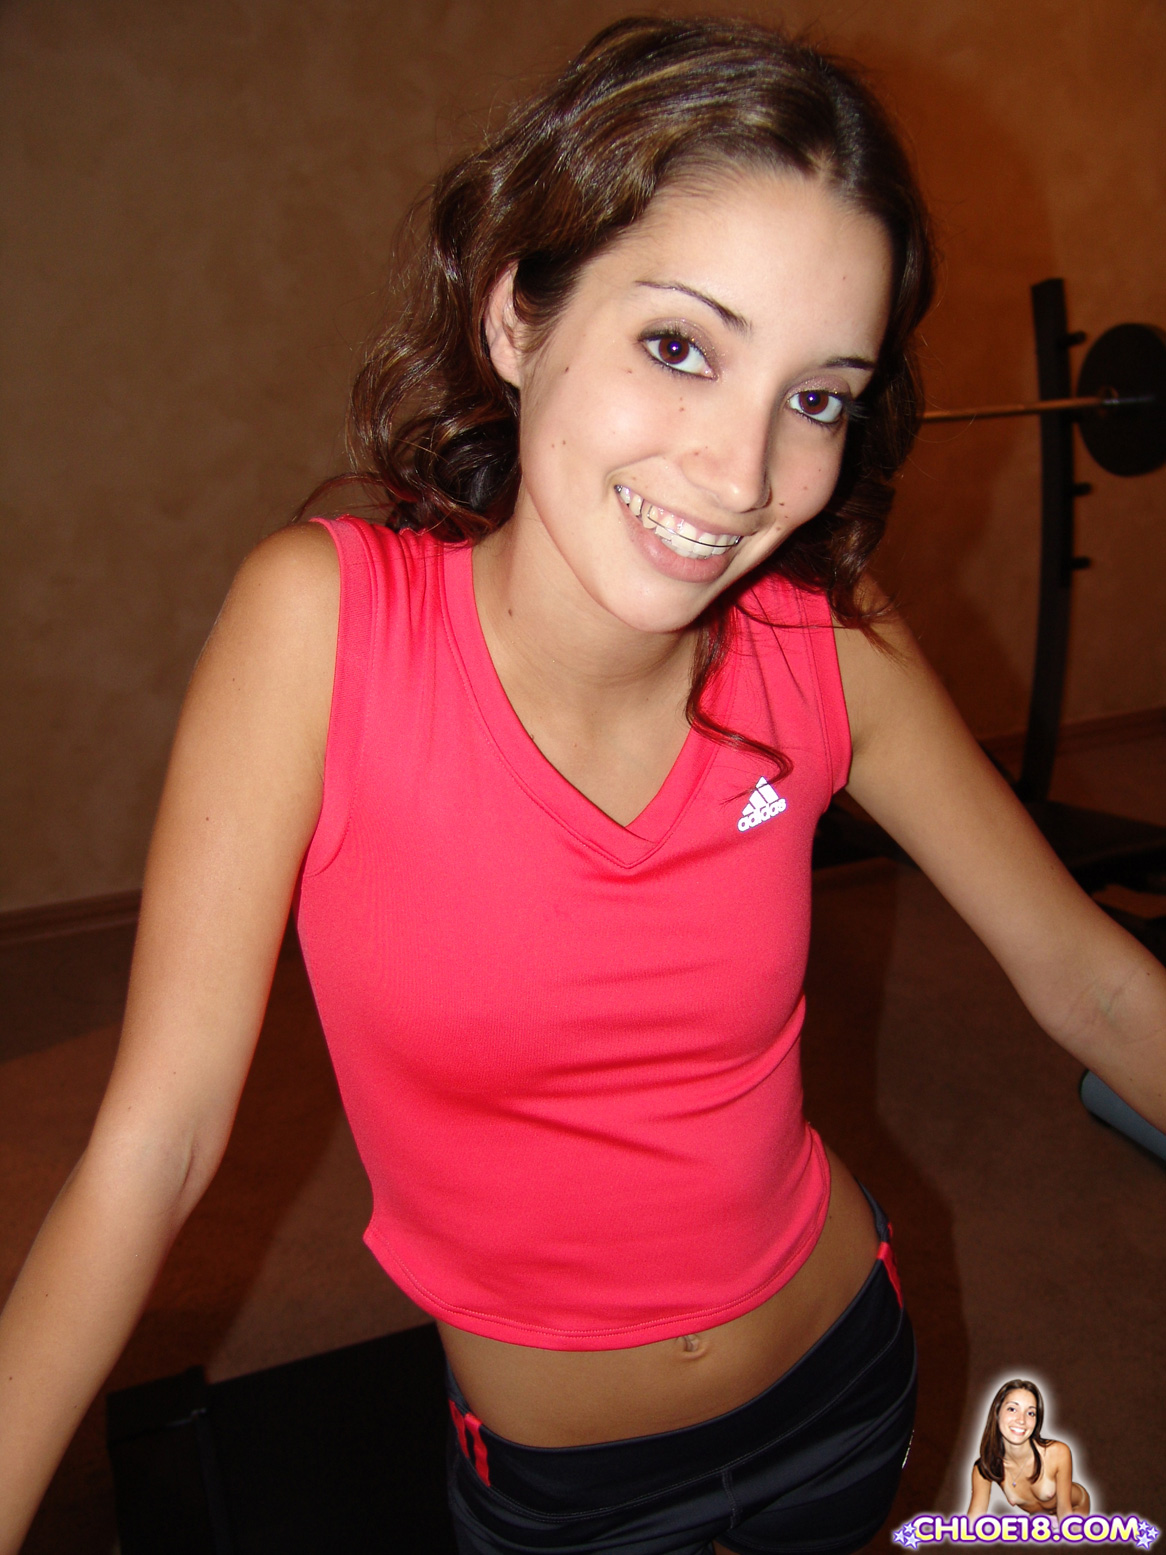 Teen Shaved Babe with Outie Belly Button Wearing Braces - Image Gallery  #31808